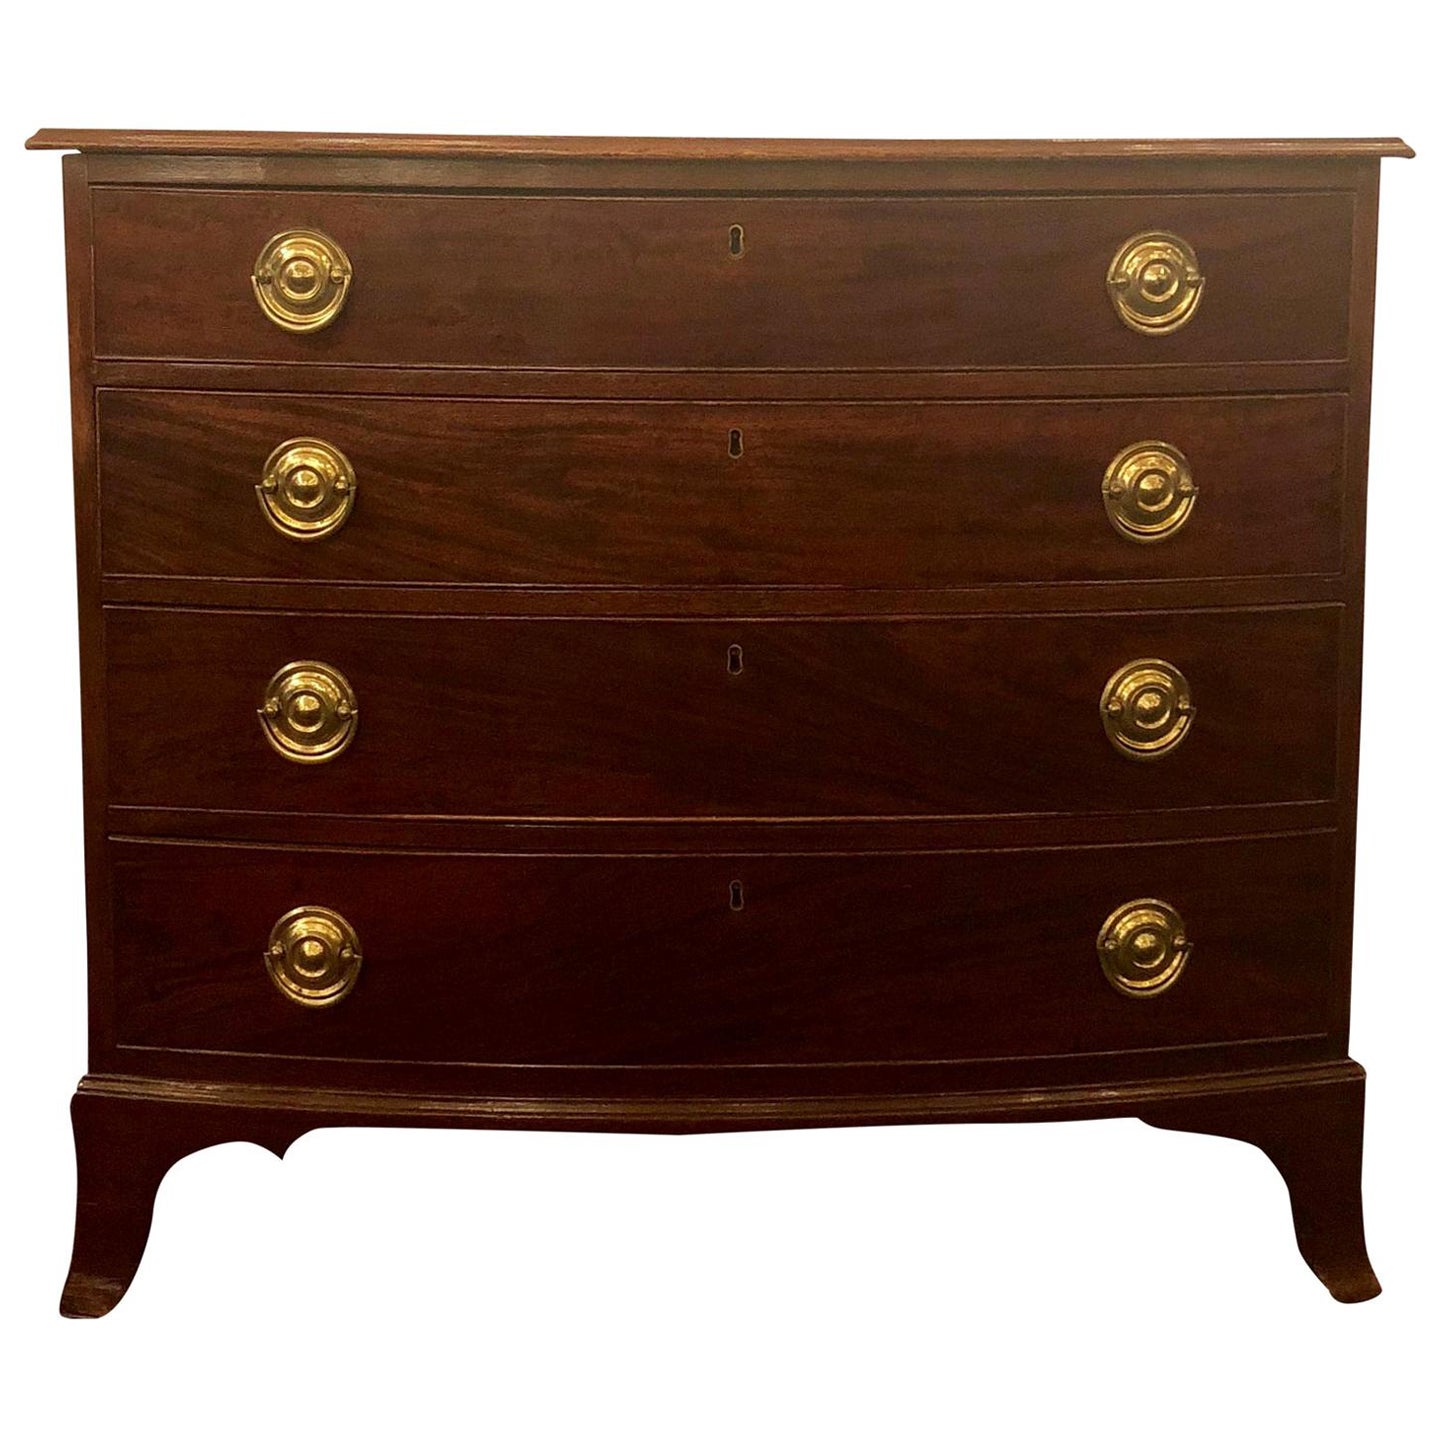 Antique American 18th Century Mahogany Bow-Front Chest of Drawers, circa 1780 For Sale